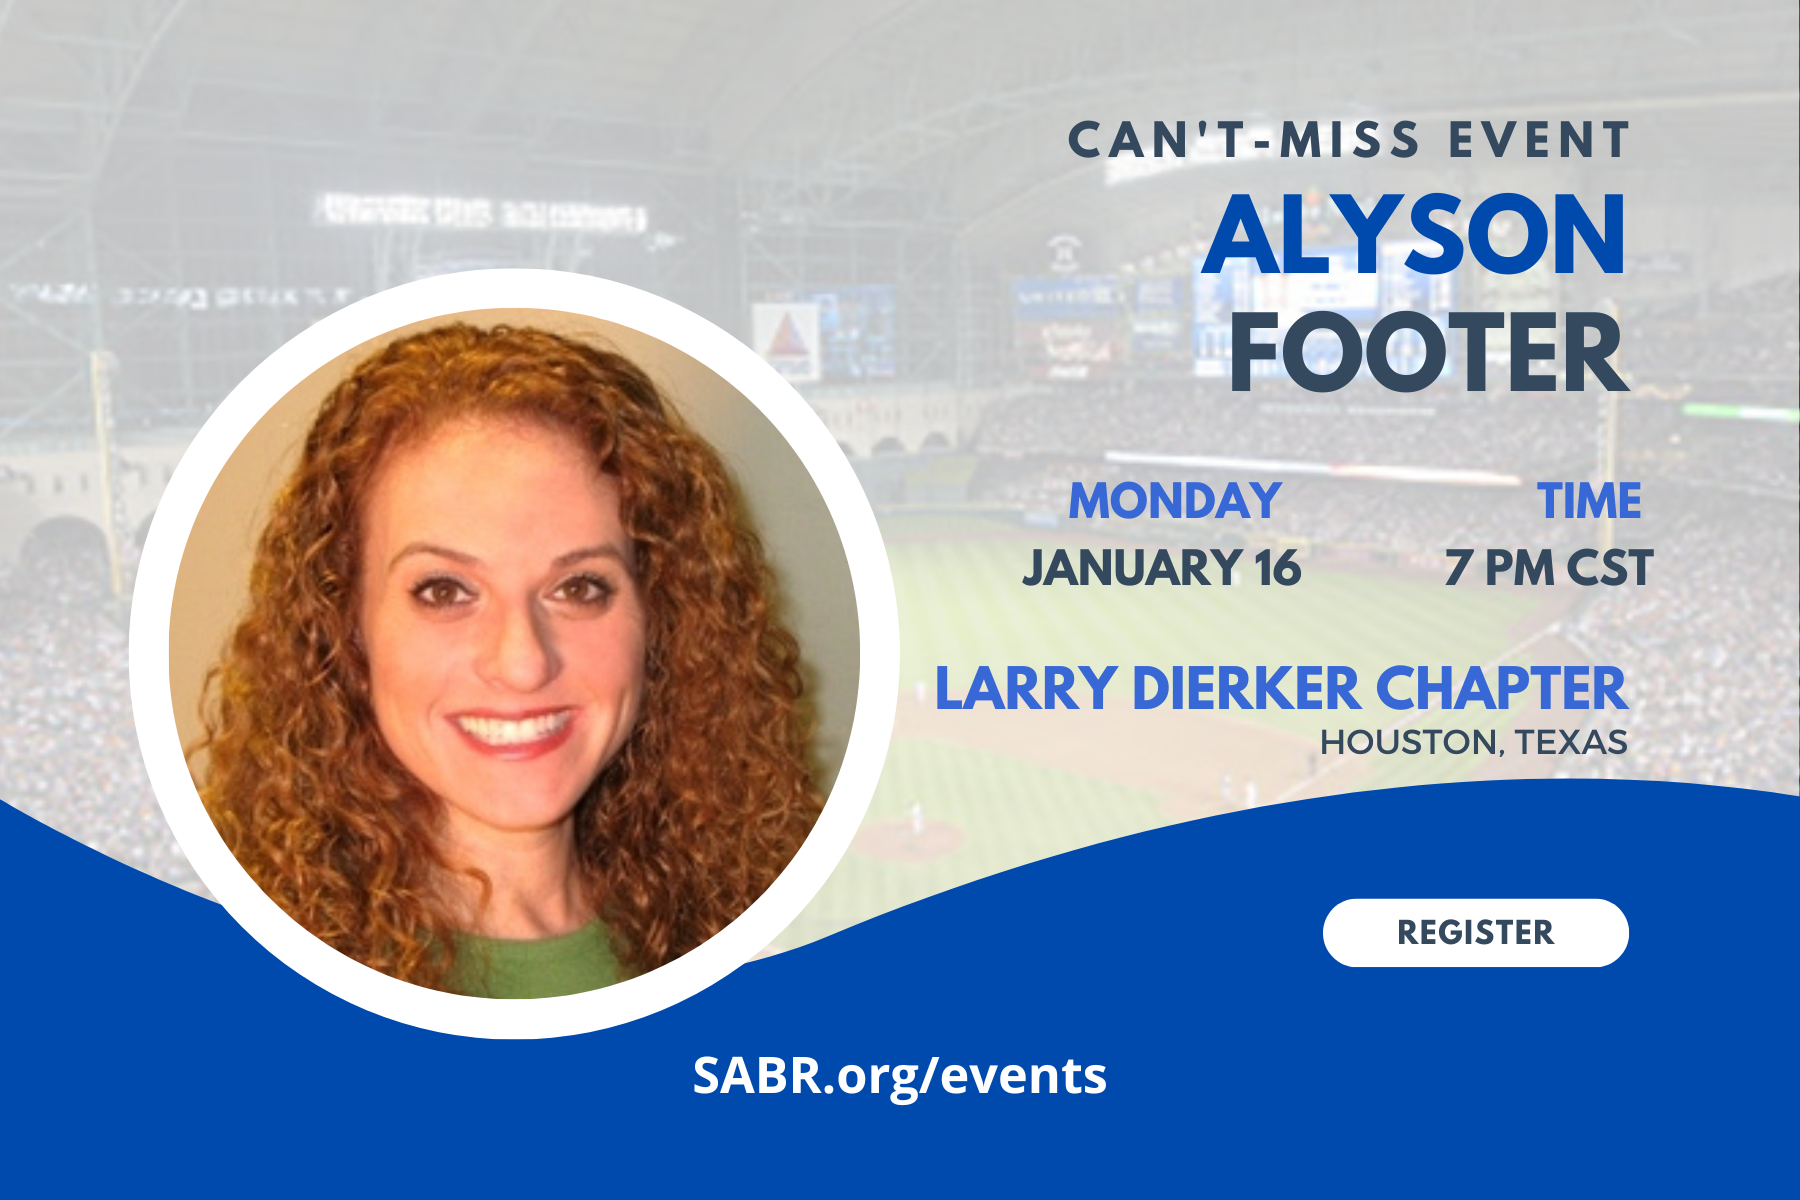 SABR's Larry Dierker Chapter will hold a hybrid meeting at 7:00 p.m. CST on Monday, January 16, 2023. Our special guest is Alyson Footer of MLB.com. Contact Joe Thompson at splendorajoe@gmail.com for Zoom details.